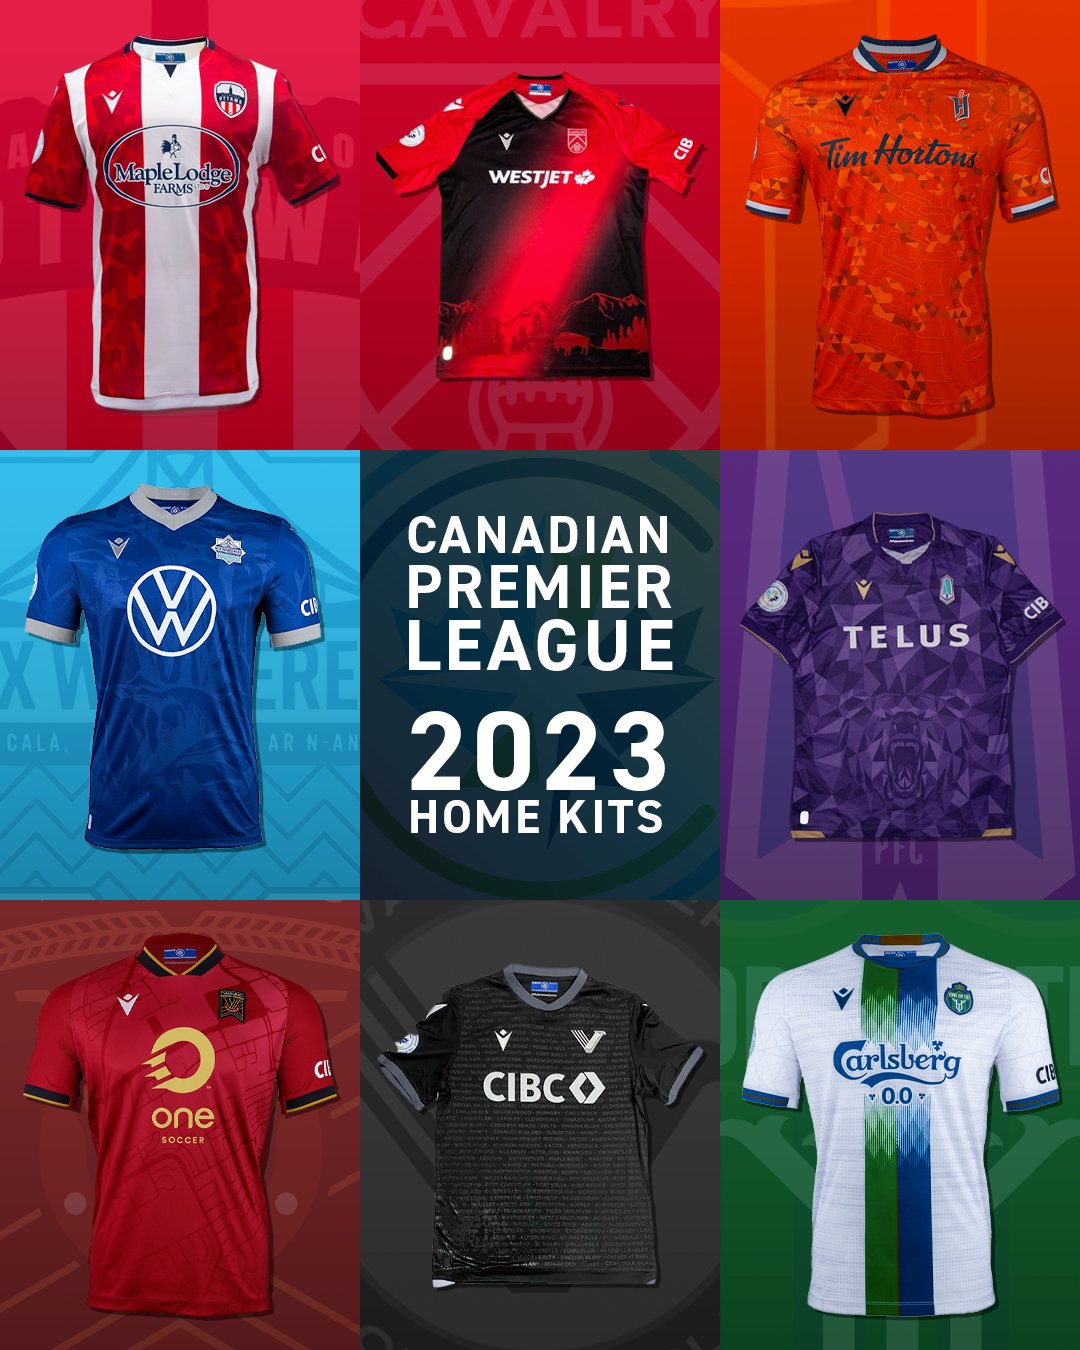 Paul Lukas on X: RT @canplnews: The home kits in the 2023